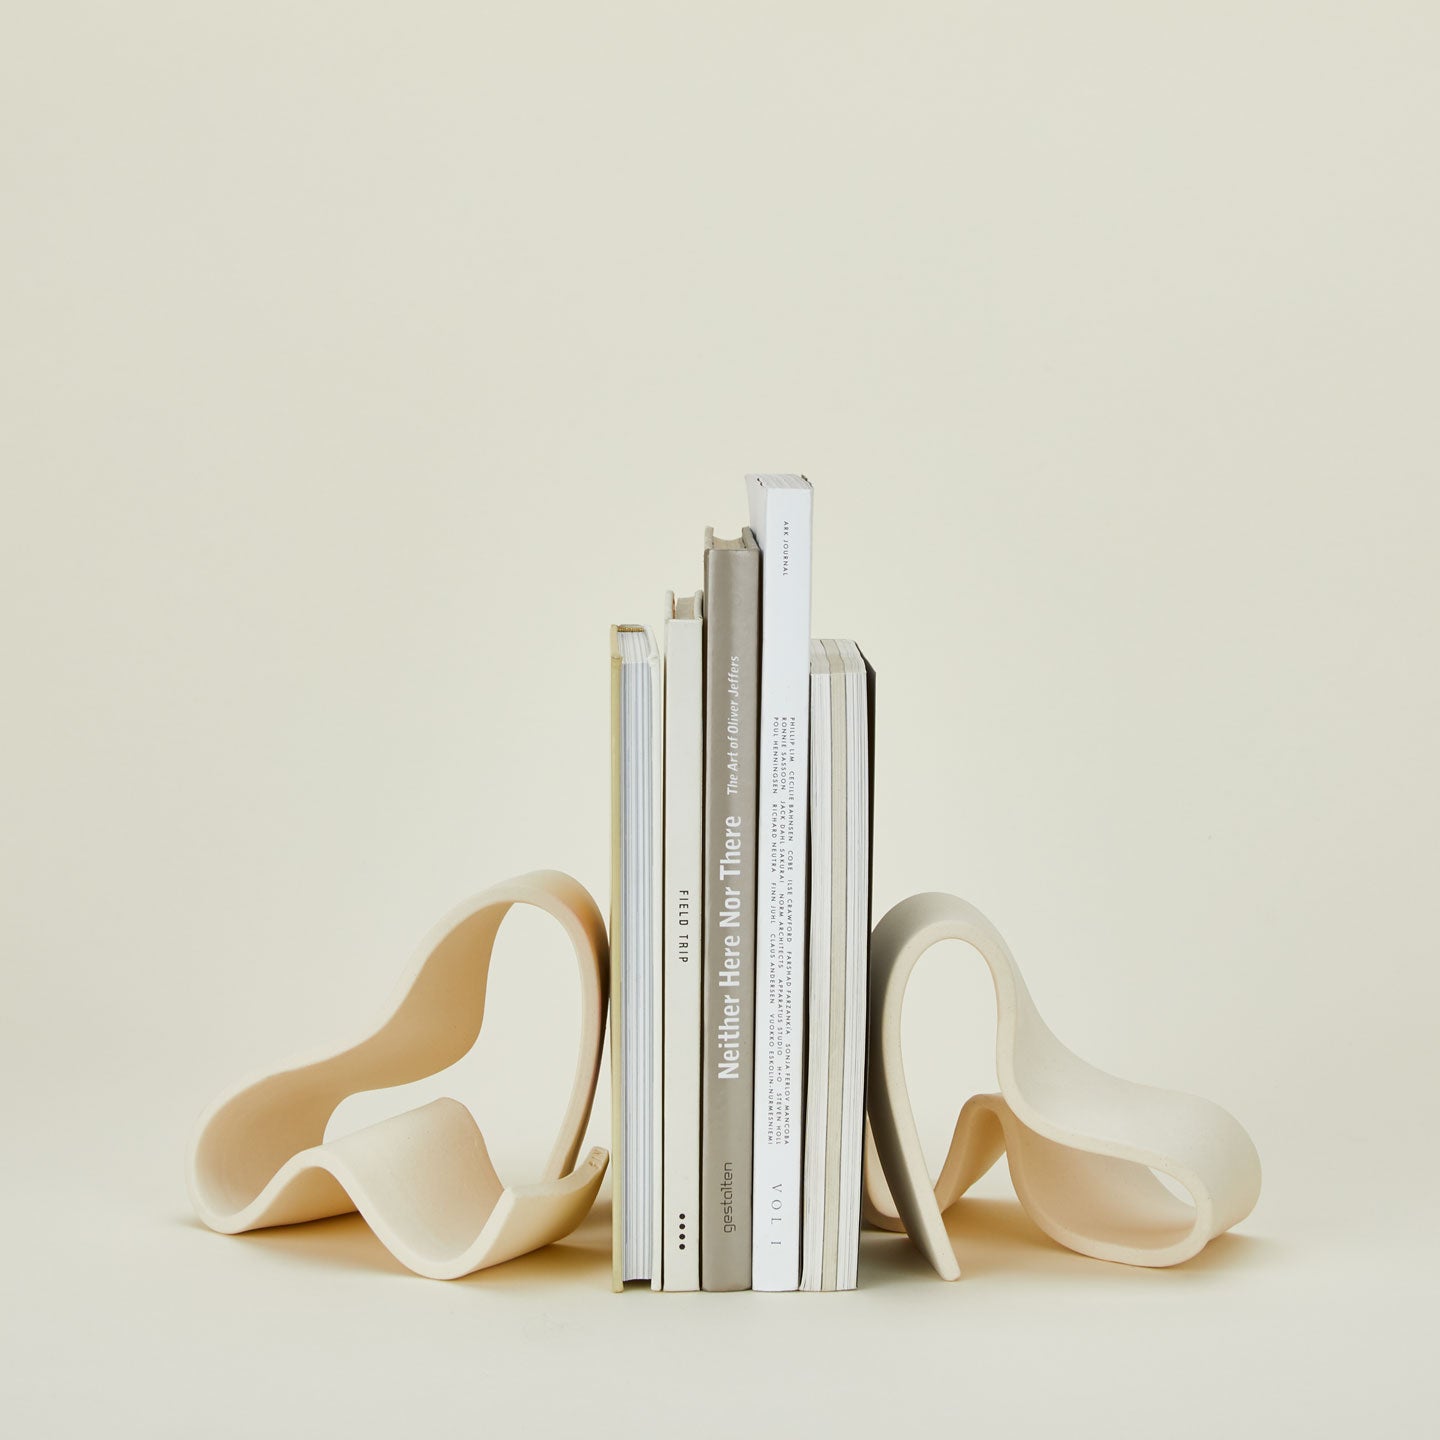 Organically shaped neutral stoneware bookends with books.